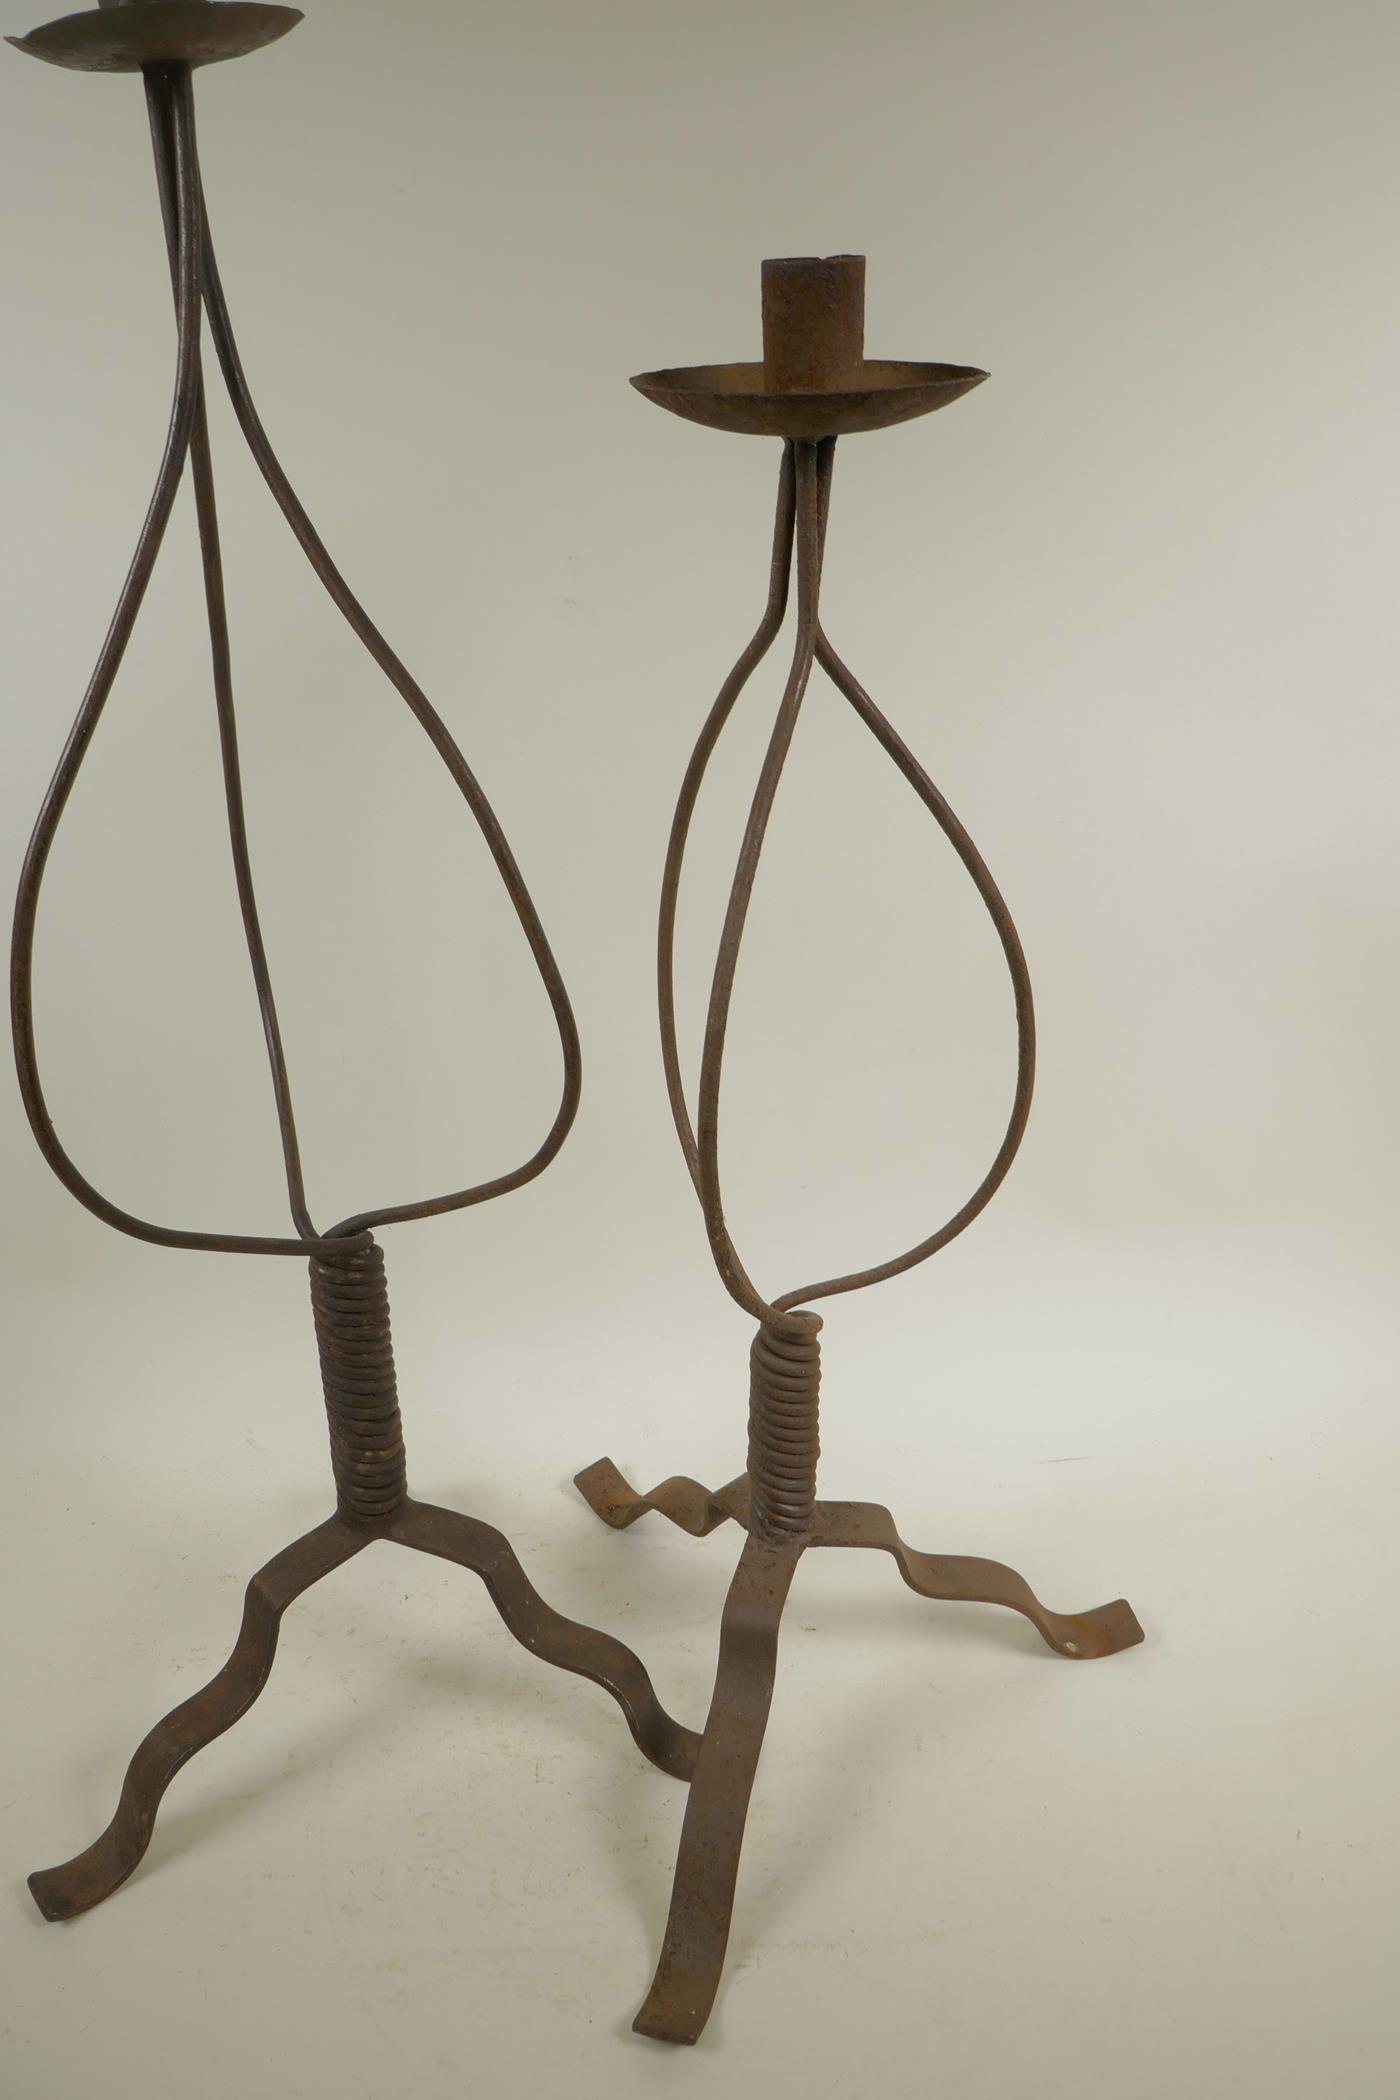 A wrought iron candlestick on tripod base, 24½" high, and another similar - Image 3 of 3